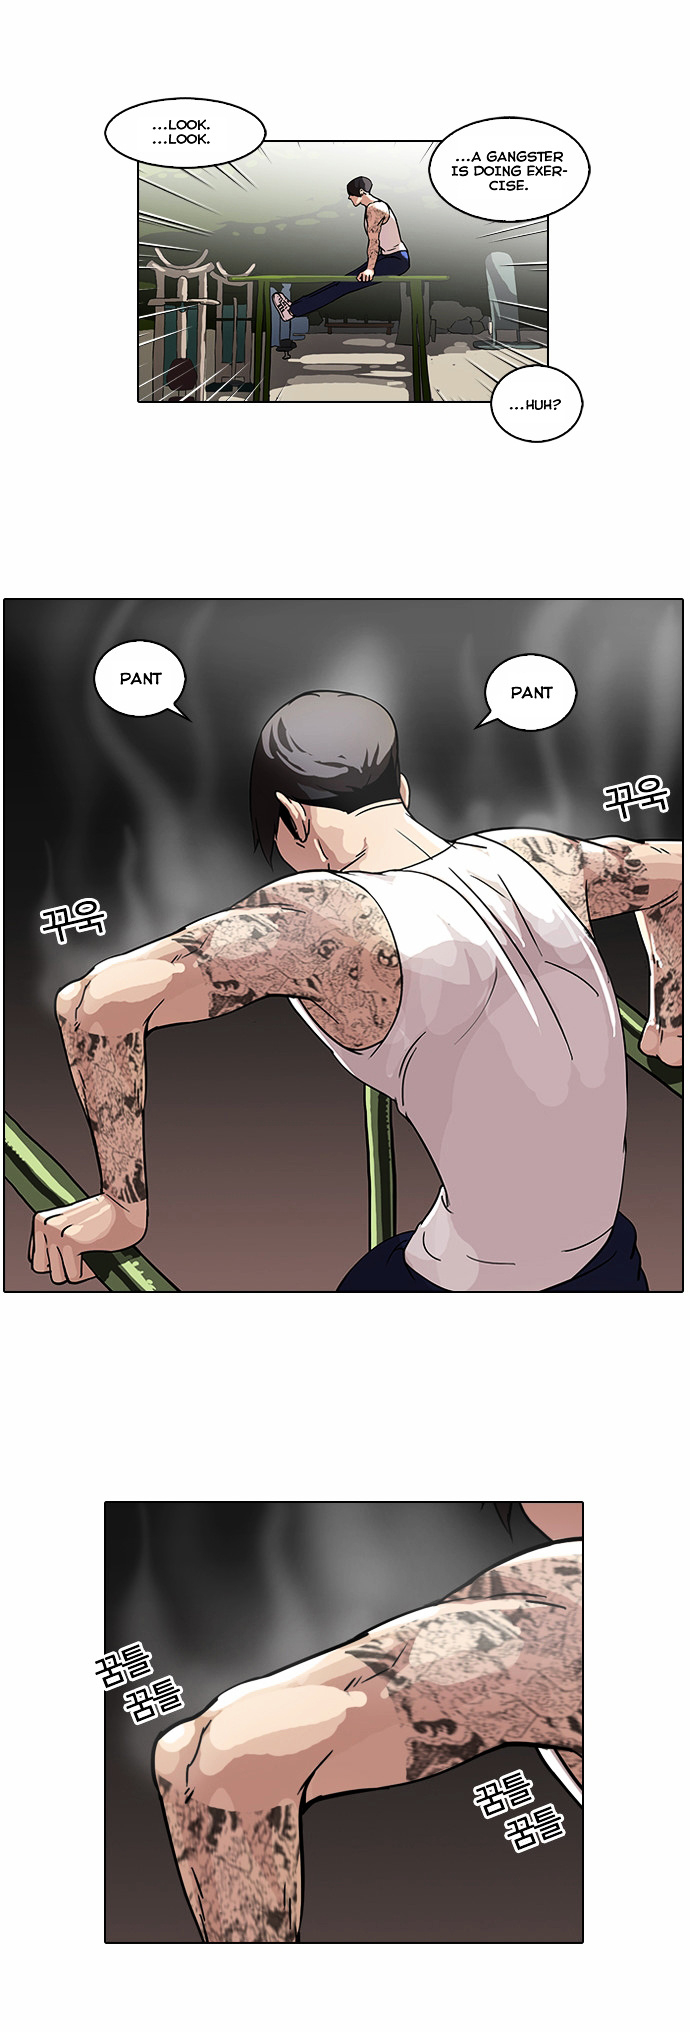 Lookism chapter 57 v2 - page 3